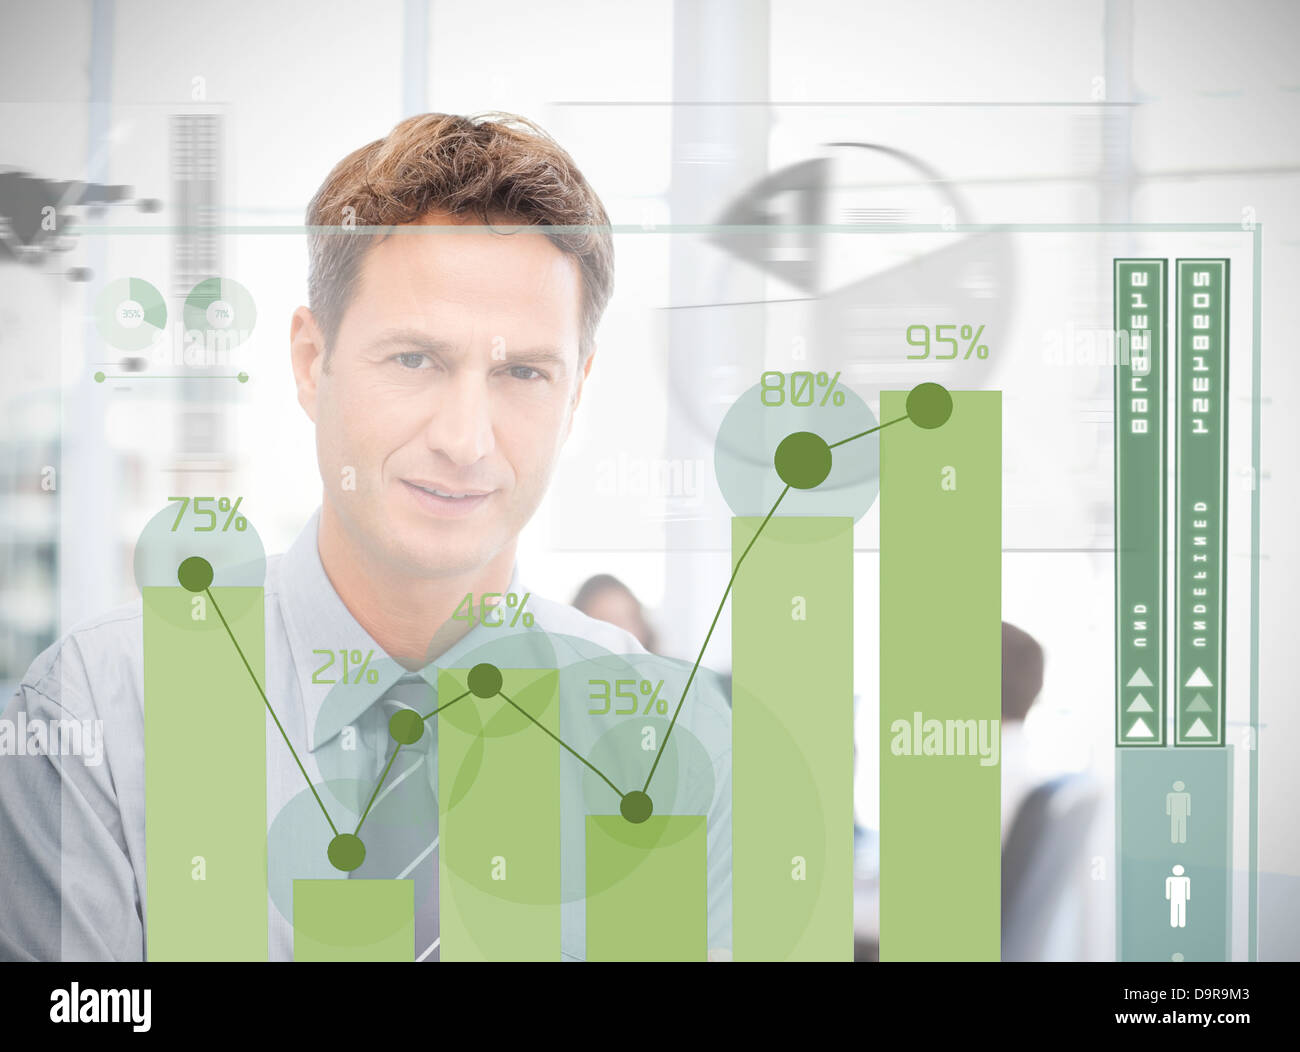 Businessman looking at green chart interface Banque D'Images